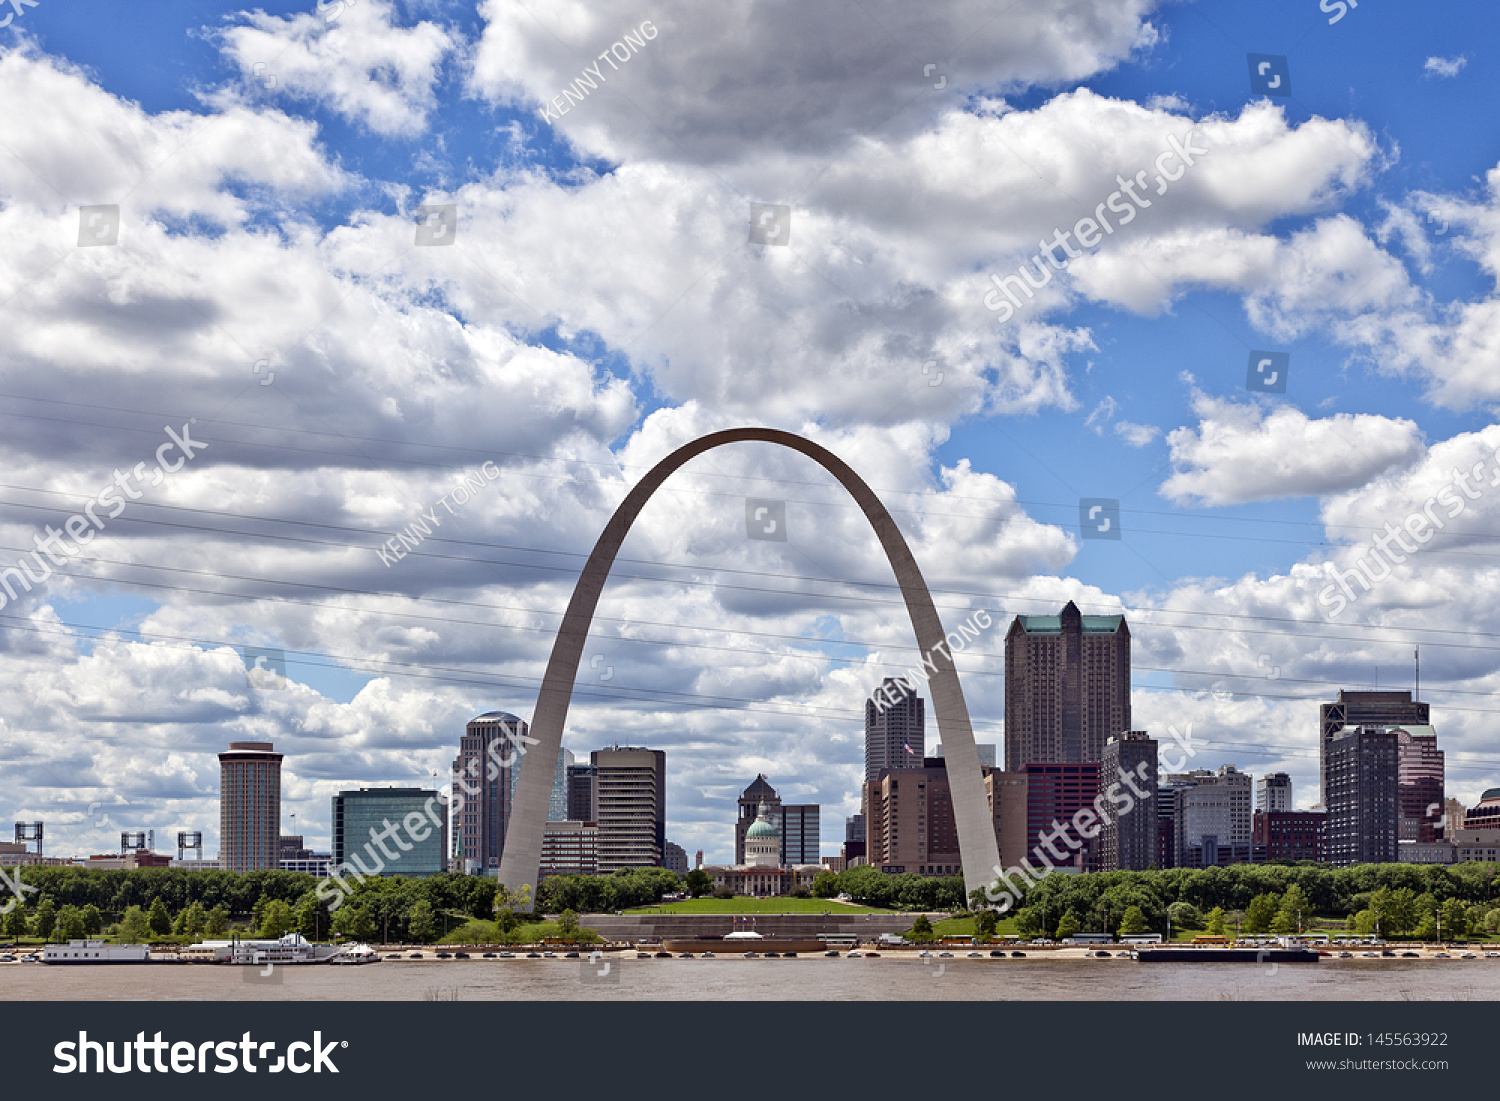 St Louis May 9 City St Stock Photo 145563922 - Shutterstock